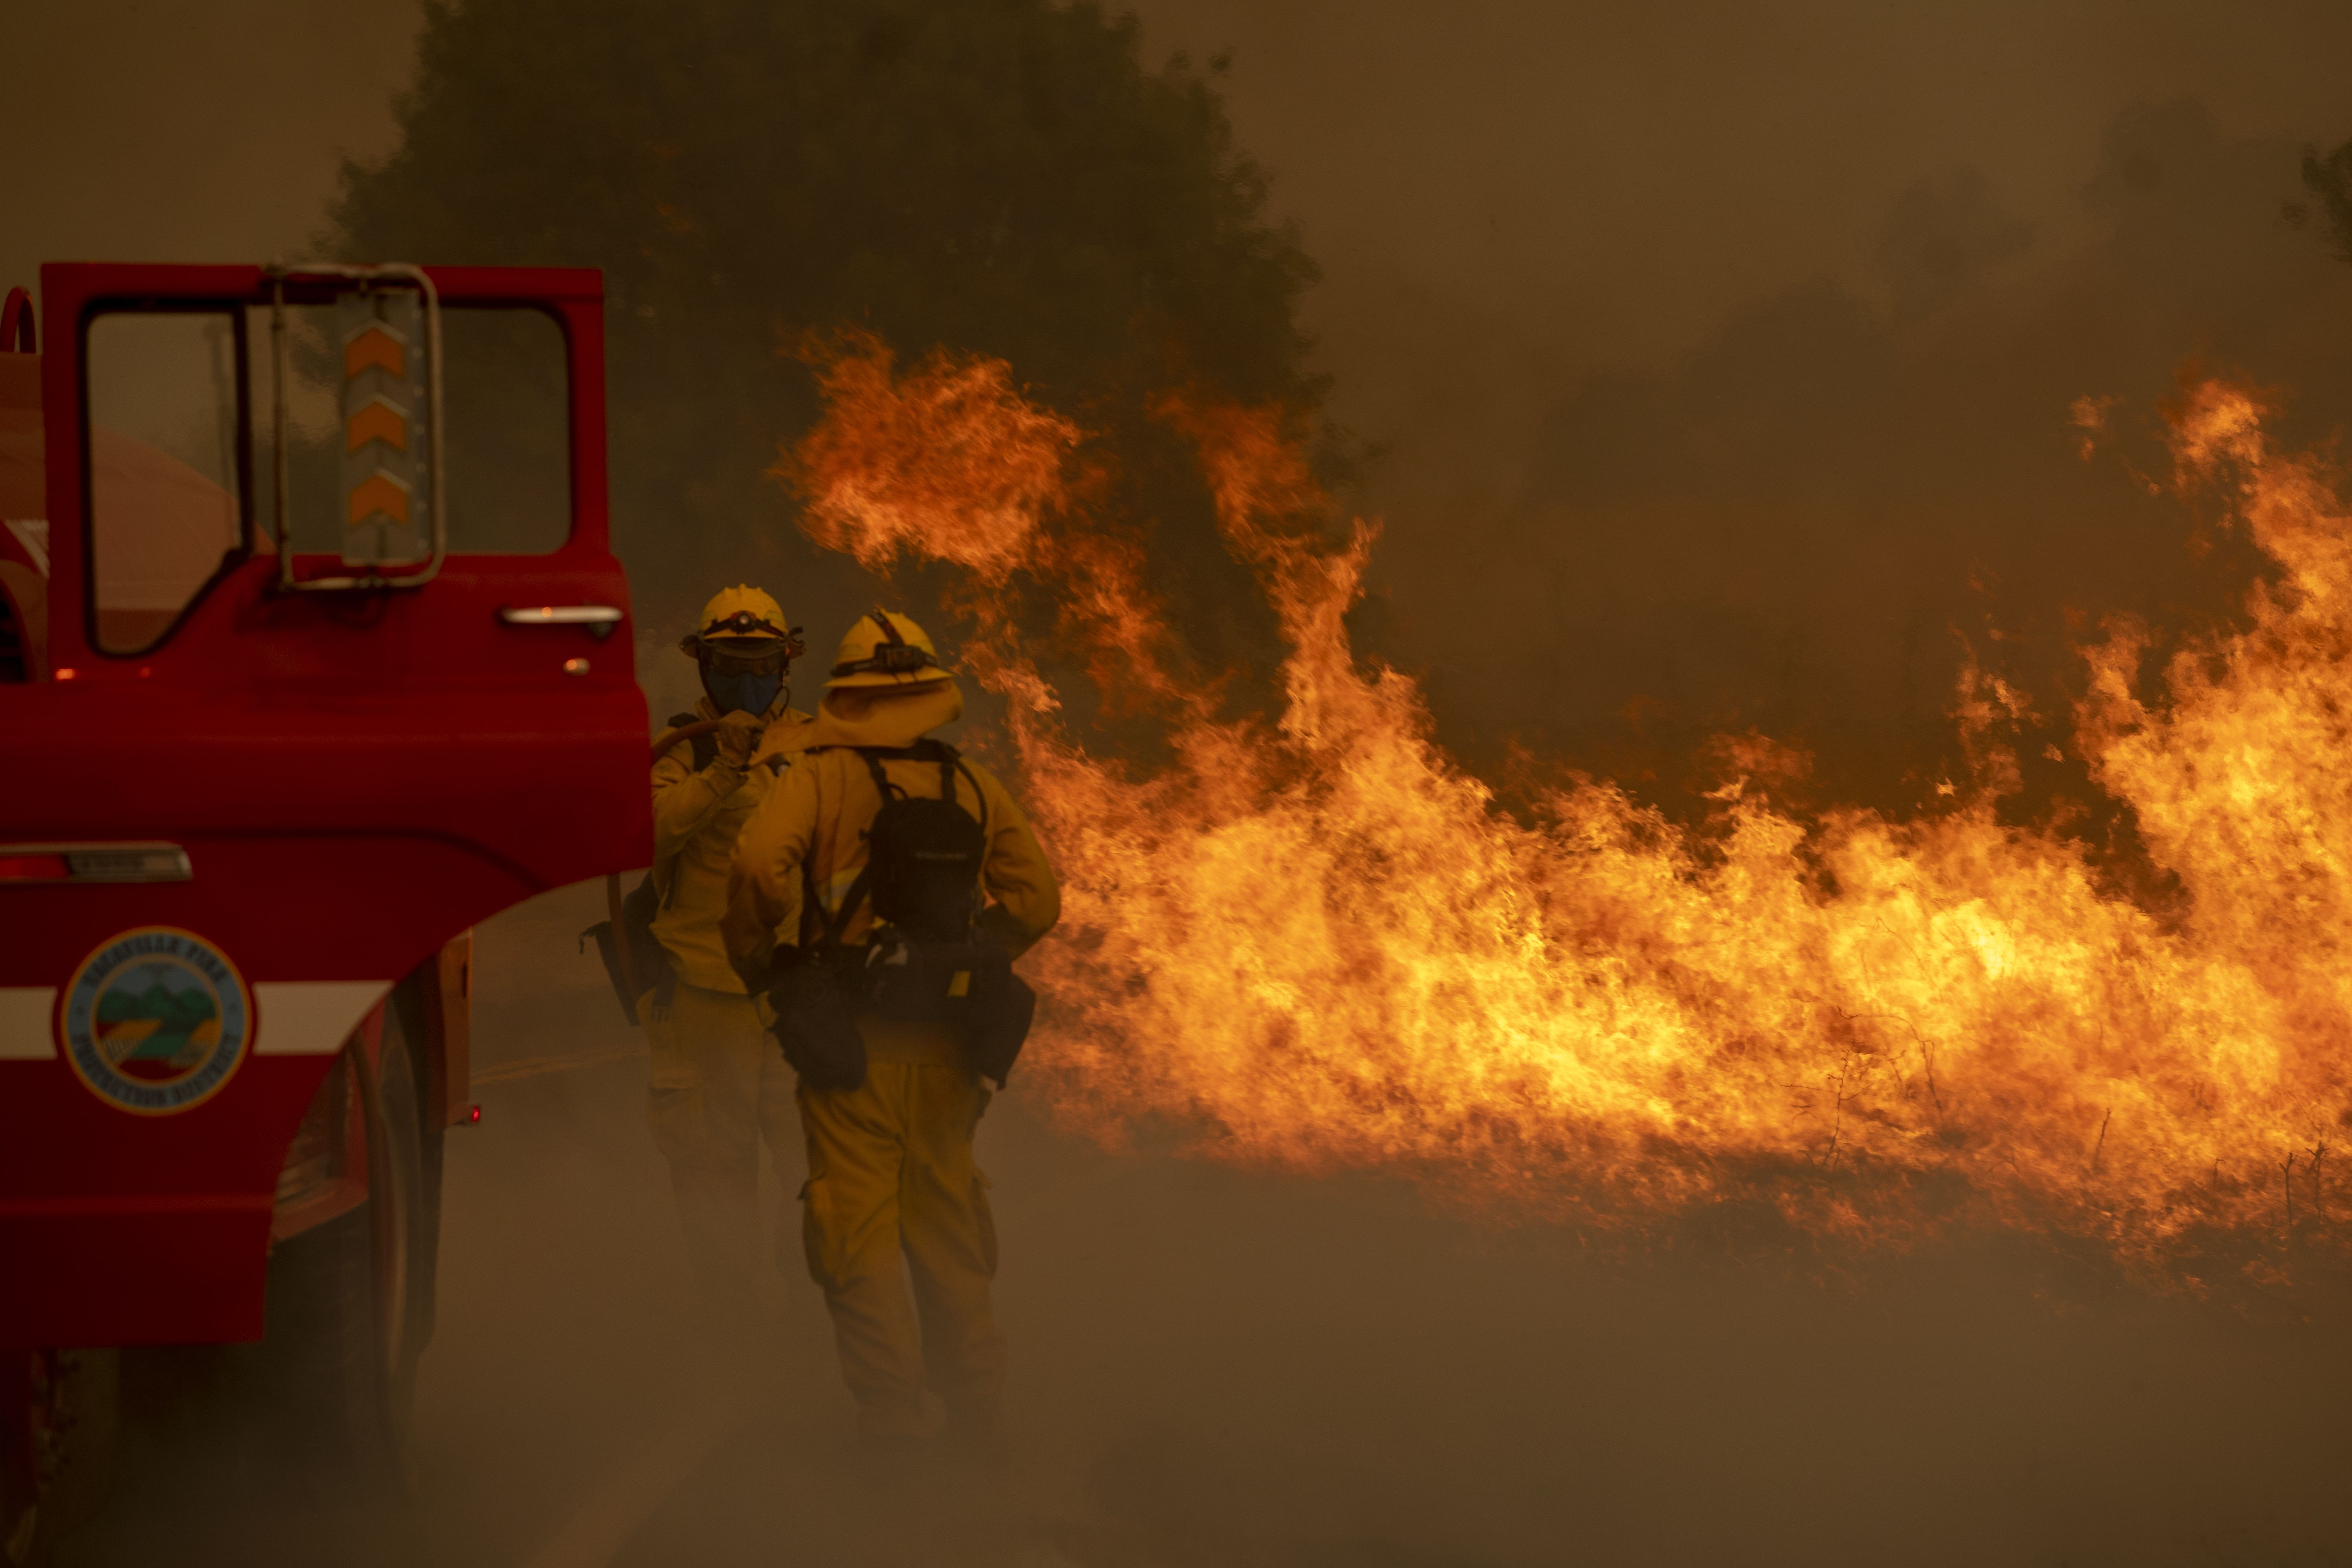  Firefighters attempt to stop a grass fire from jumping a road in Vacaville, Calif., Wednesday, Aug. 19